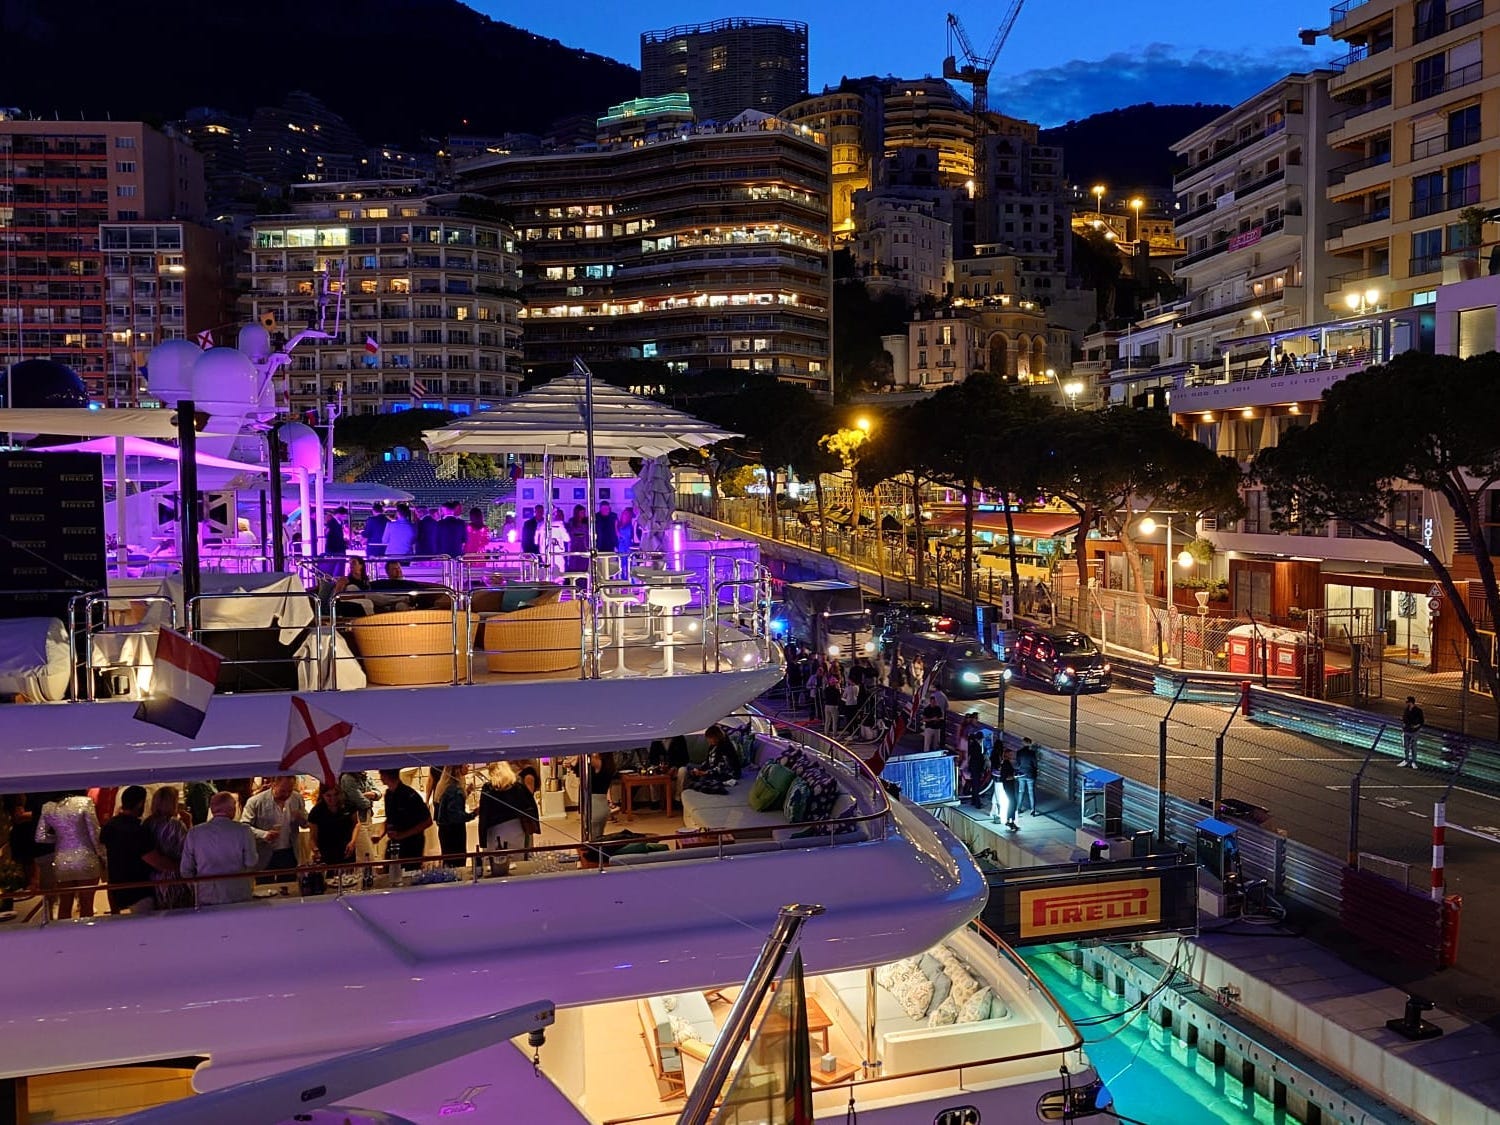 <p>To fully experience the glamorous lifestyle in Monaco, we indulged in a <a href="https://www.businessinsider.com/disney-yacht-club-resort-review-worth-it-photos-solo-traveler-2023-8">yacht party</a> on Friday night. This experience was an add-on to our overall package, and it cost £1,265, or about $1,610.</p><p>We boarded the boat and were greeted with glasses of Champagne. The bottomless drinks and canapés flowed as the onboard DJ pumped music, drowning out the sounds of nearby boats.</p><p>As dusk turned to nightfall, the partygoers seemed to buzz with anticipation for the excitement the weekend had to offer — and we couldn't wait.</p>